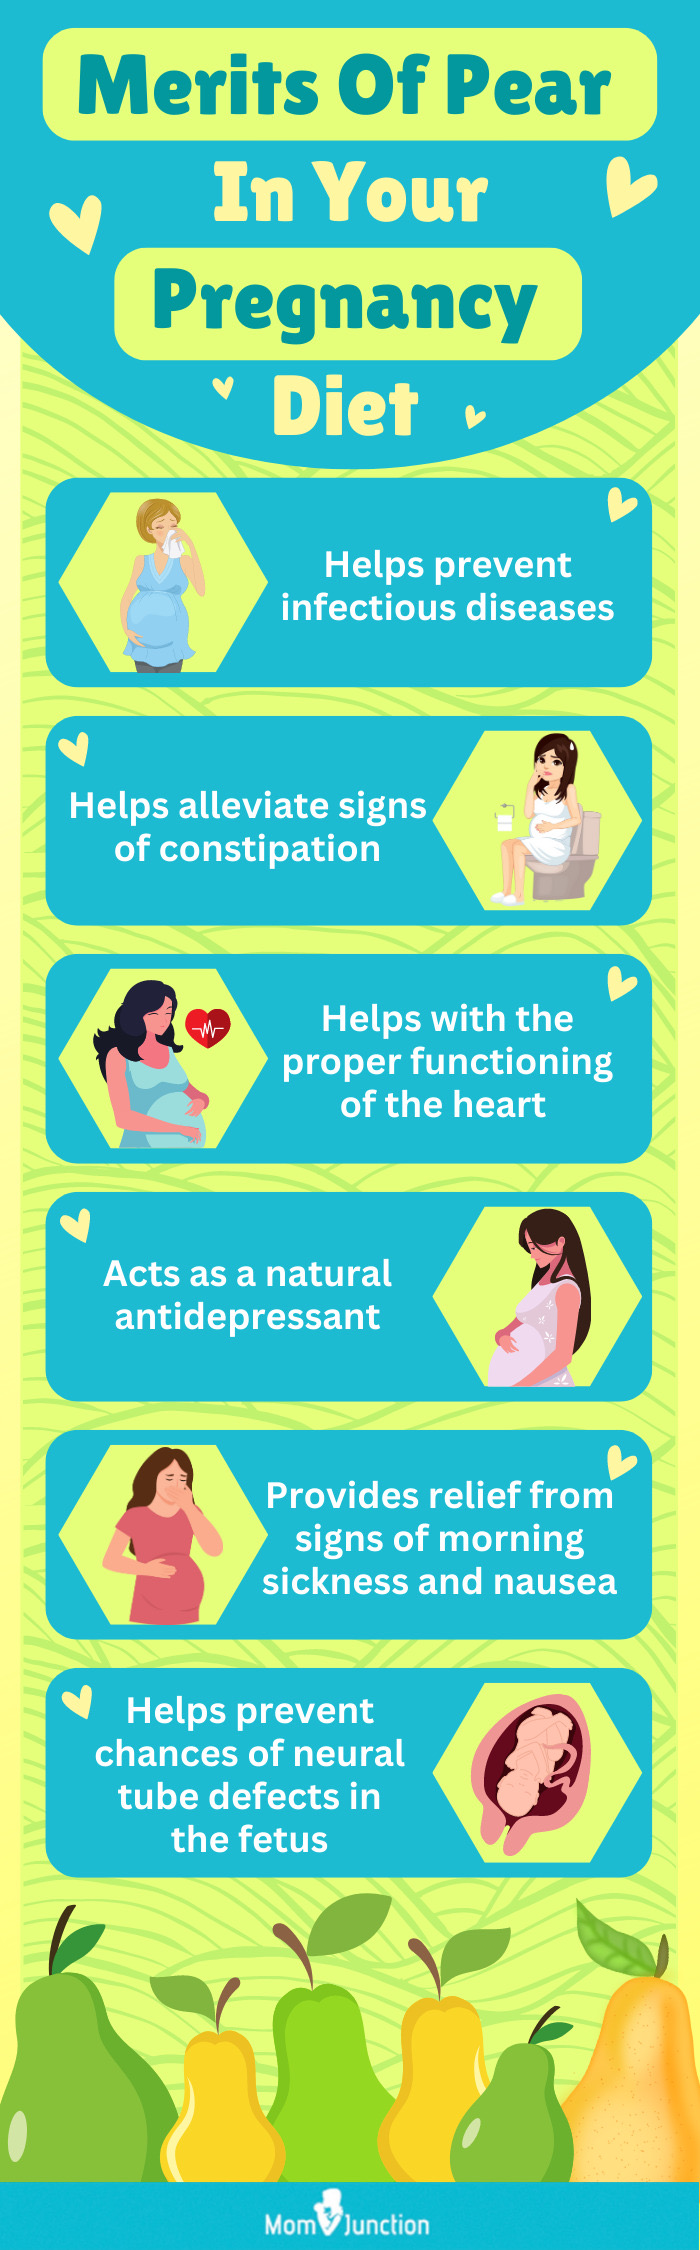 merits of pear in your pregnancy diet (infographic)